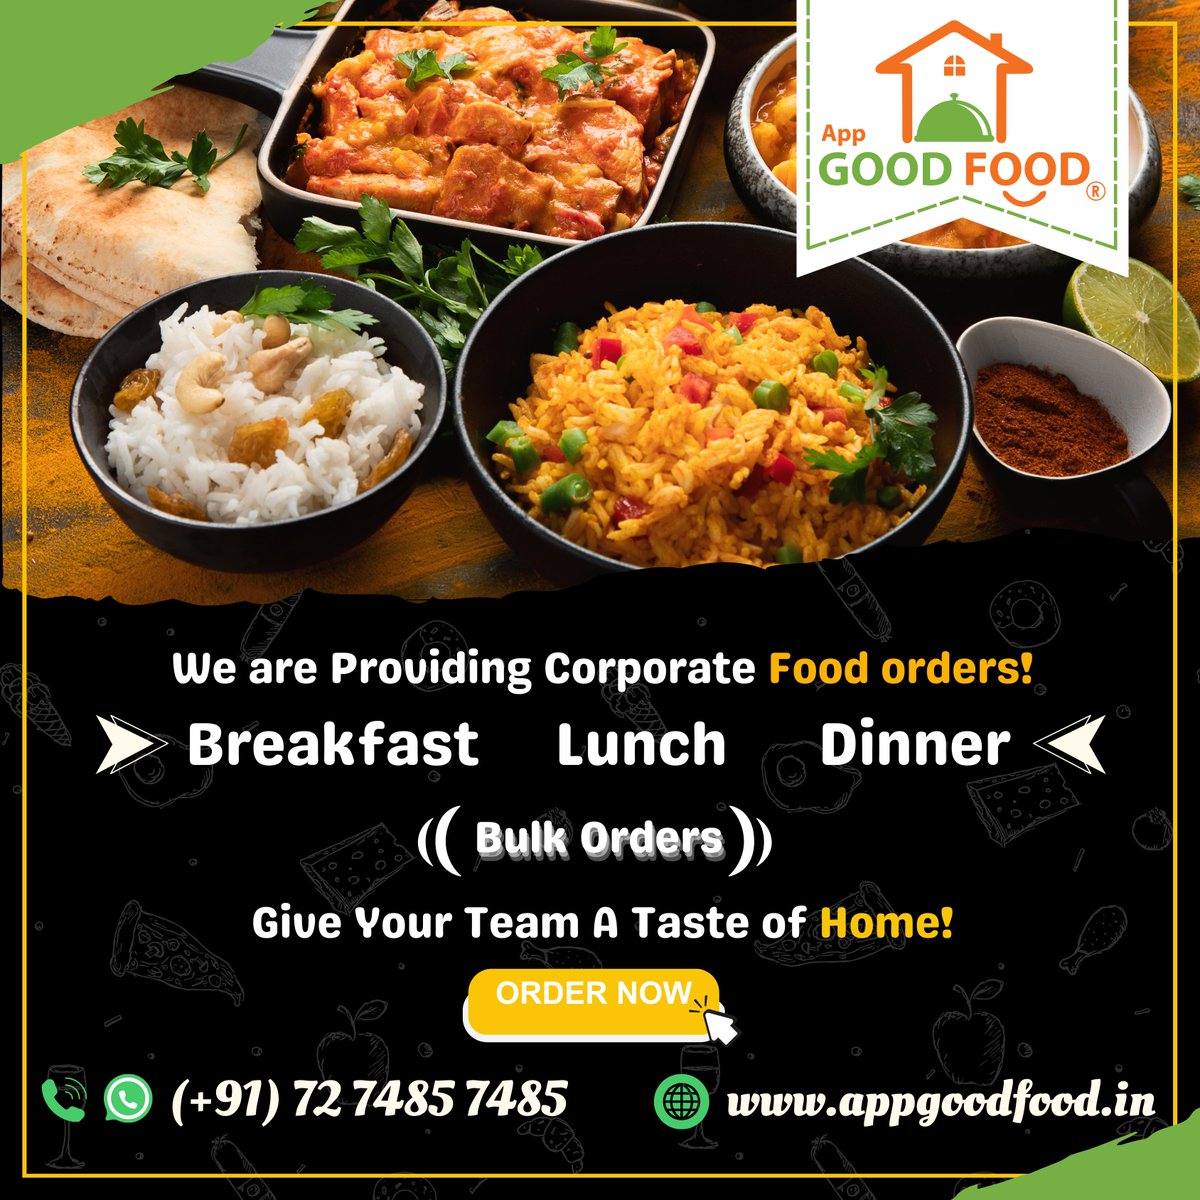 Healthy food, Healthy Employees, Healthy Business with our Corporate Meals 🤩

📞 For more information, Call/WhatsApp: (+91) 72-7485-7485

#appgoodfood #homecooking #homefood #fooddelivery  #foodie #homecook #homemadefooddelivery #lunchbox #healthyfood #corporate #Food #FoodPorn